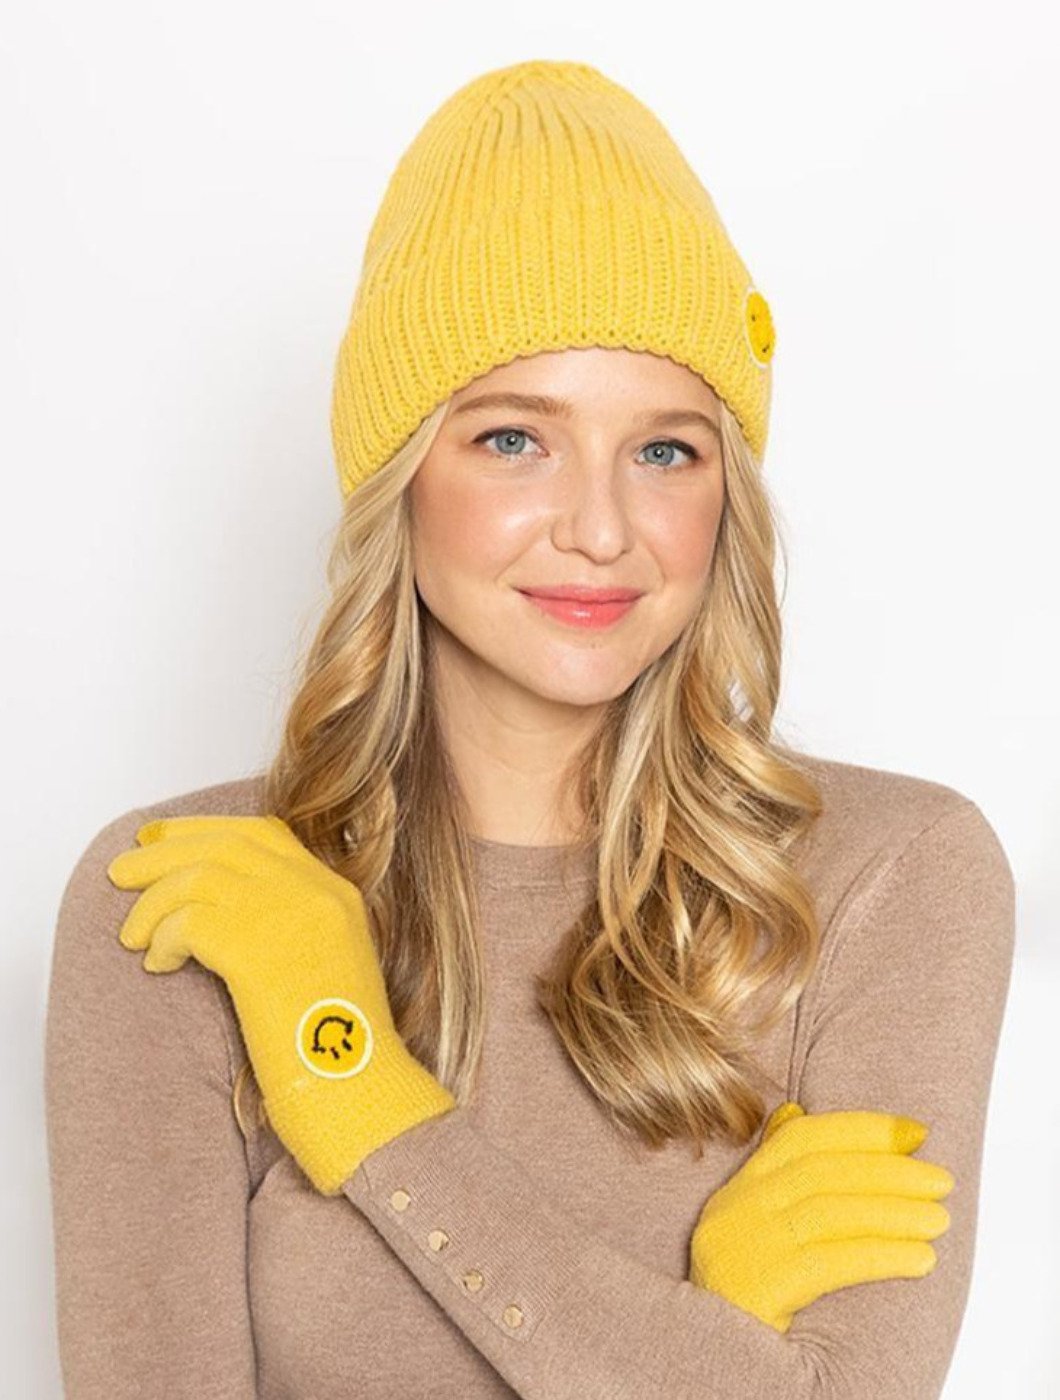 Smiley Face Patch Knit Texting Gloves - Asst. Colors